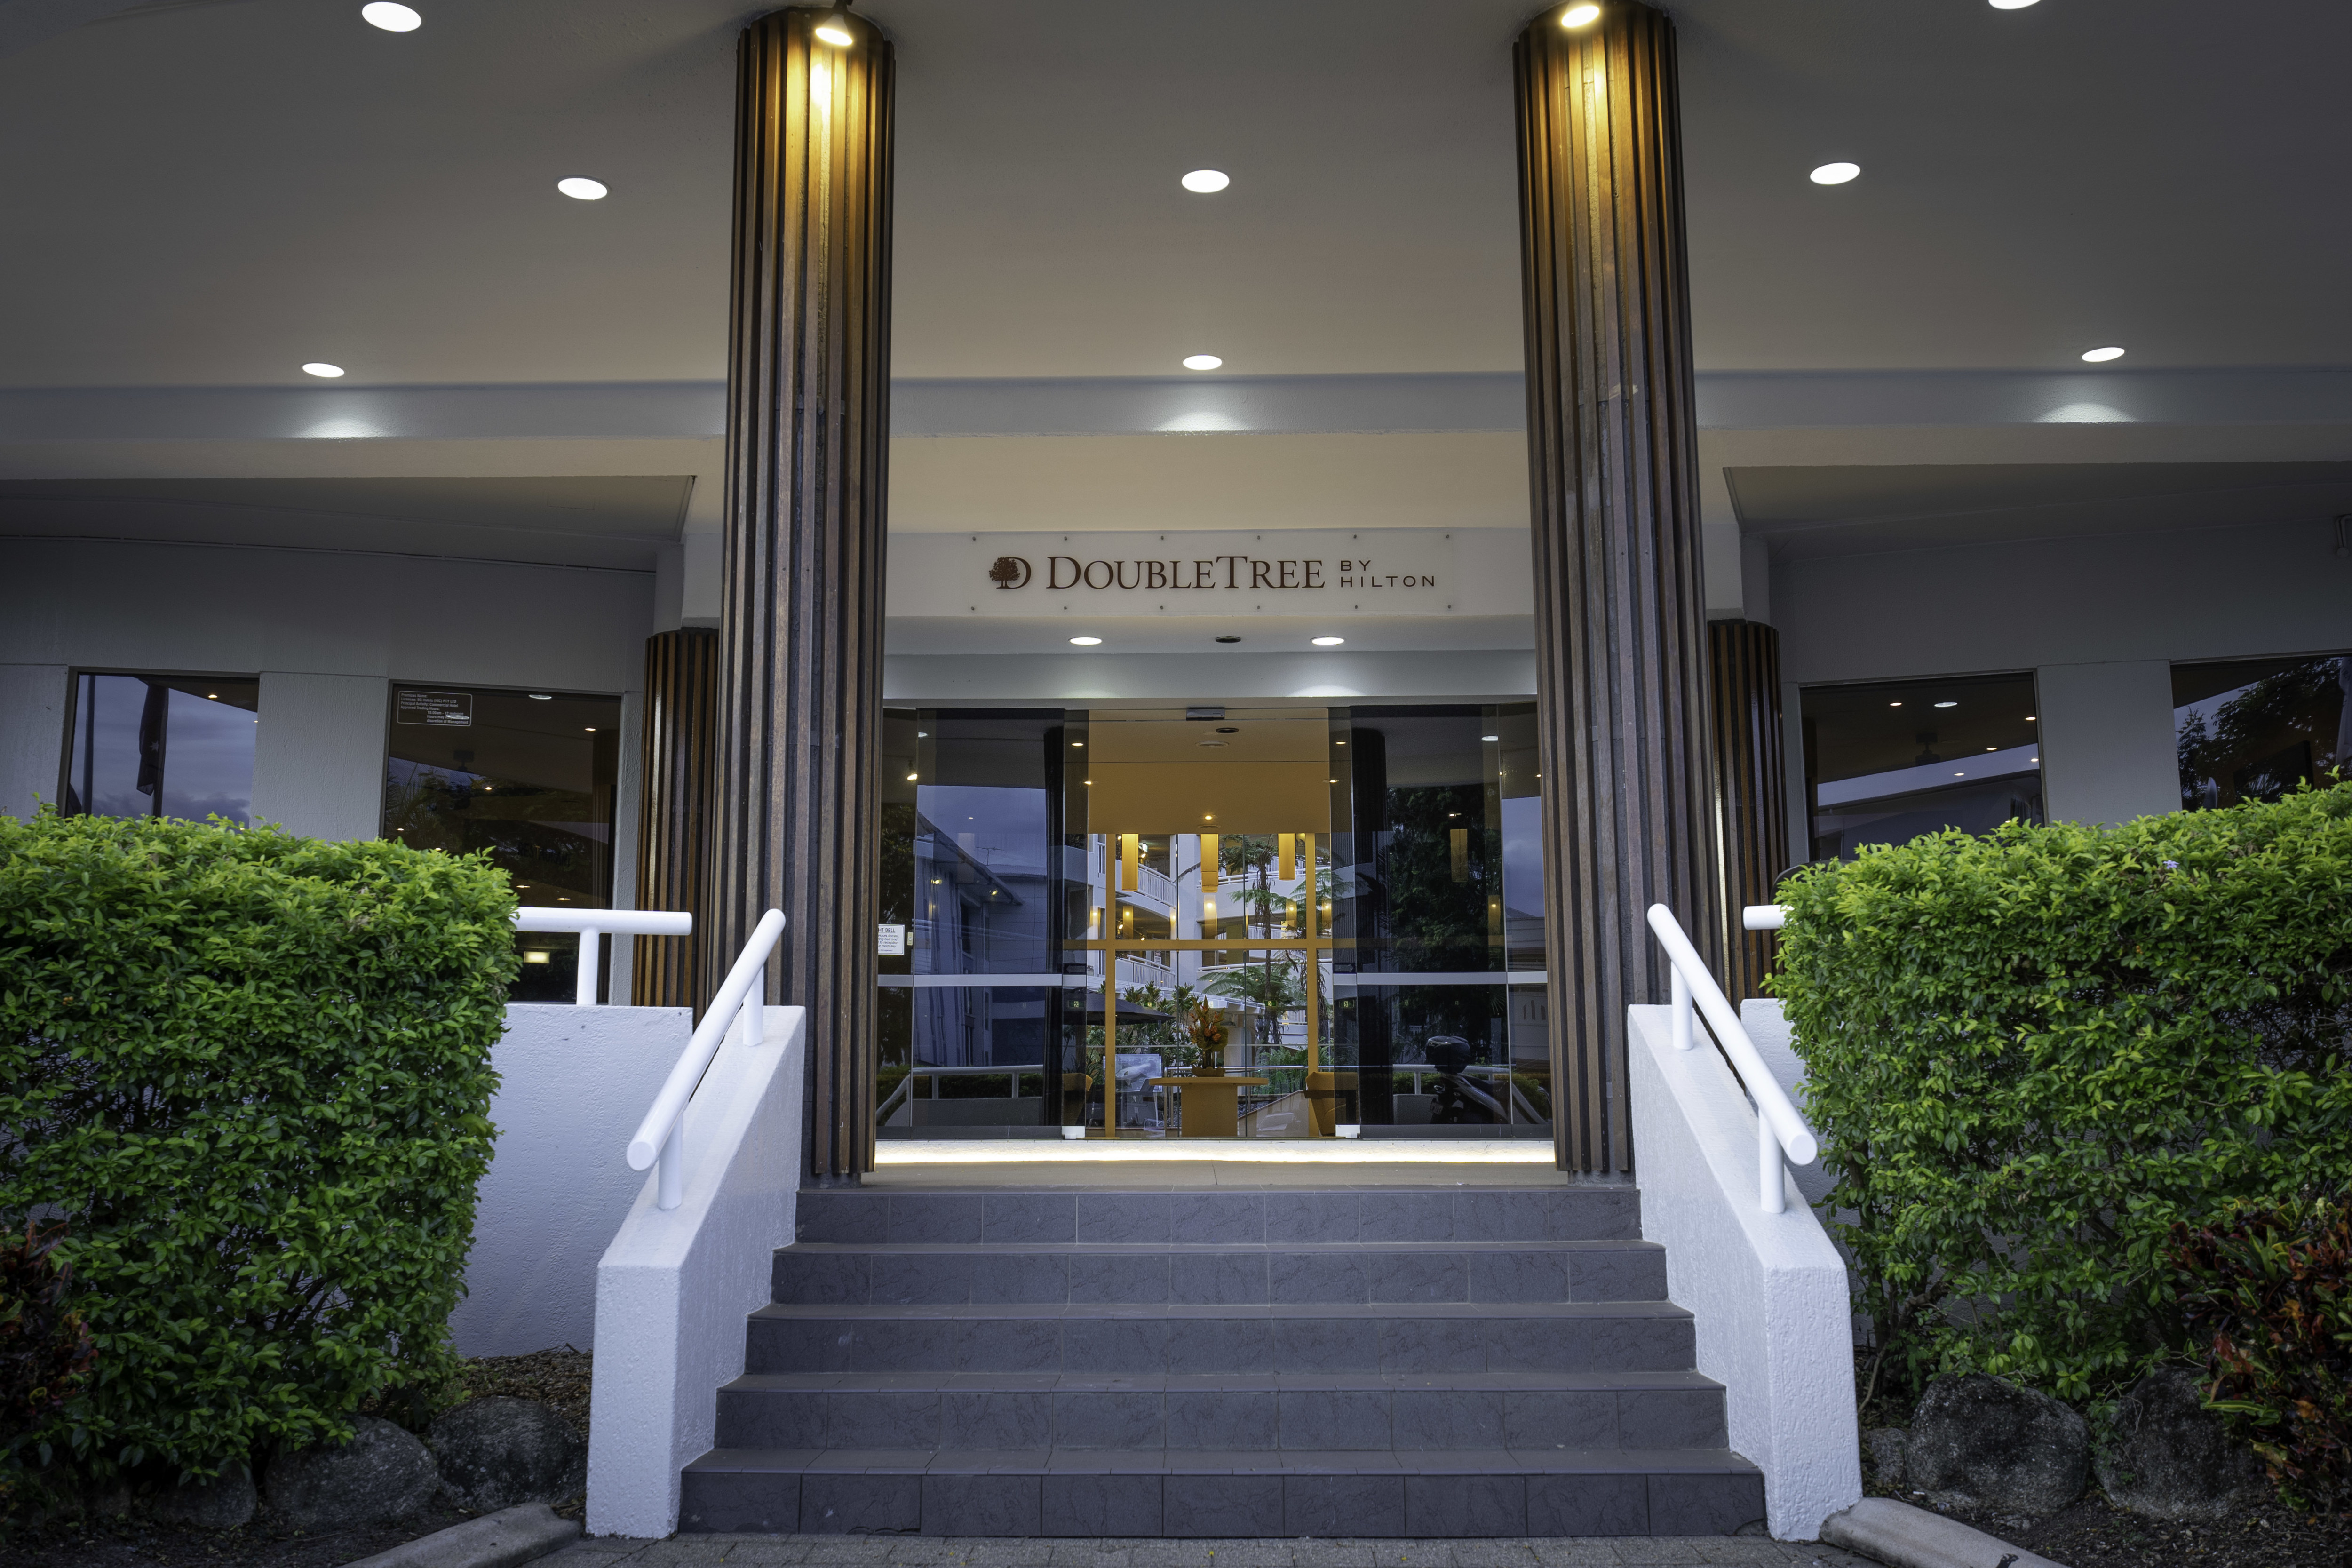 Exterior Entrance to DoubleTree Hotel 